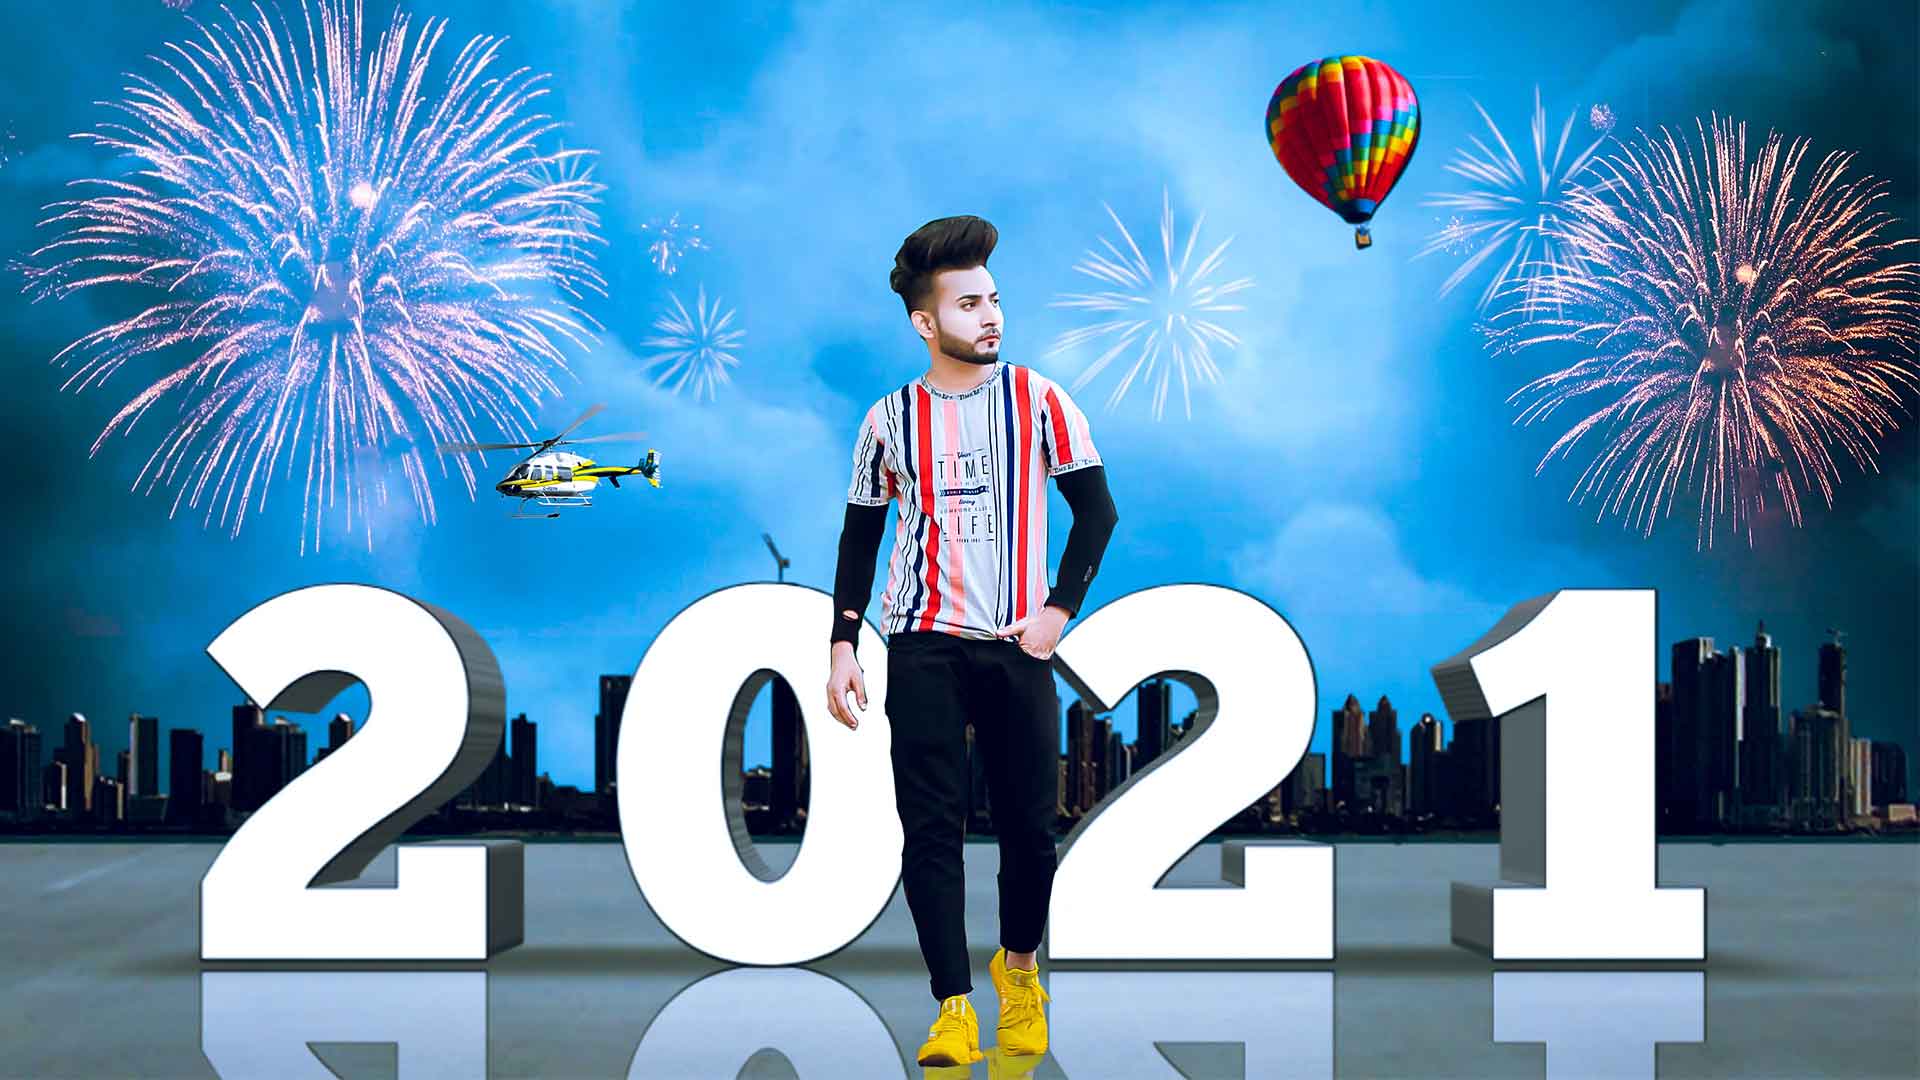 2021 Happy New Year Latest Editing Background Png Download Ak Editz Picsart Photo Editing Here's a list of the best free photo editing software tools in according to g2 user reviews. picsart photo editing